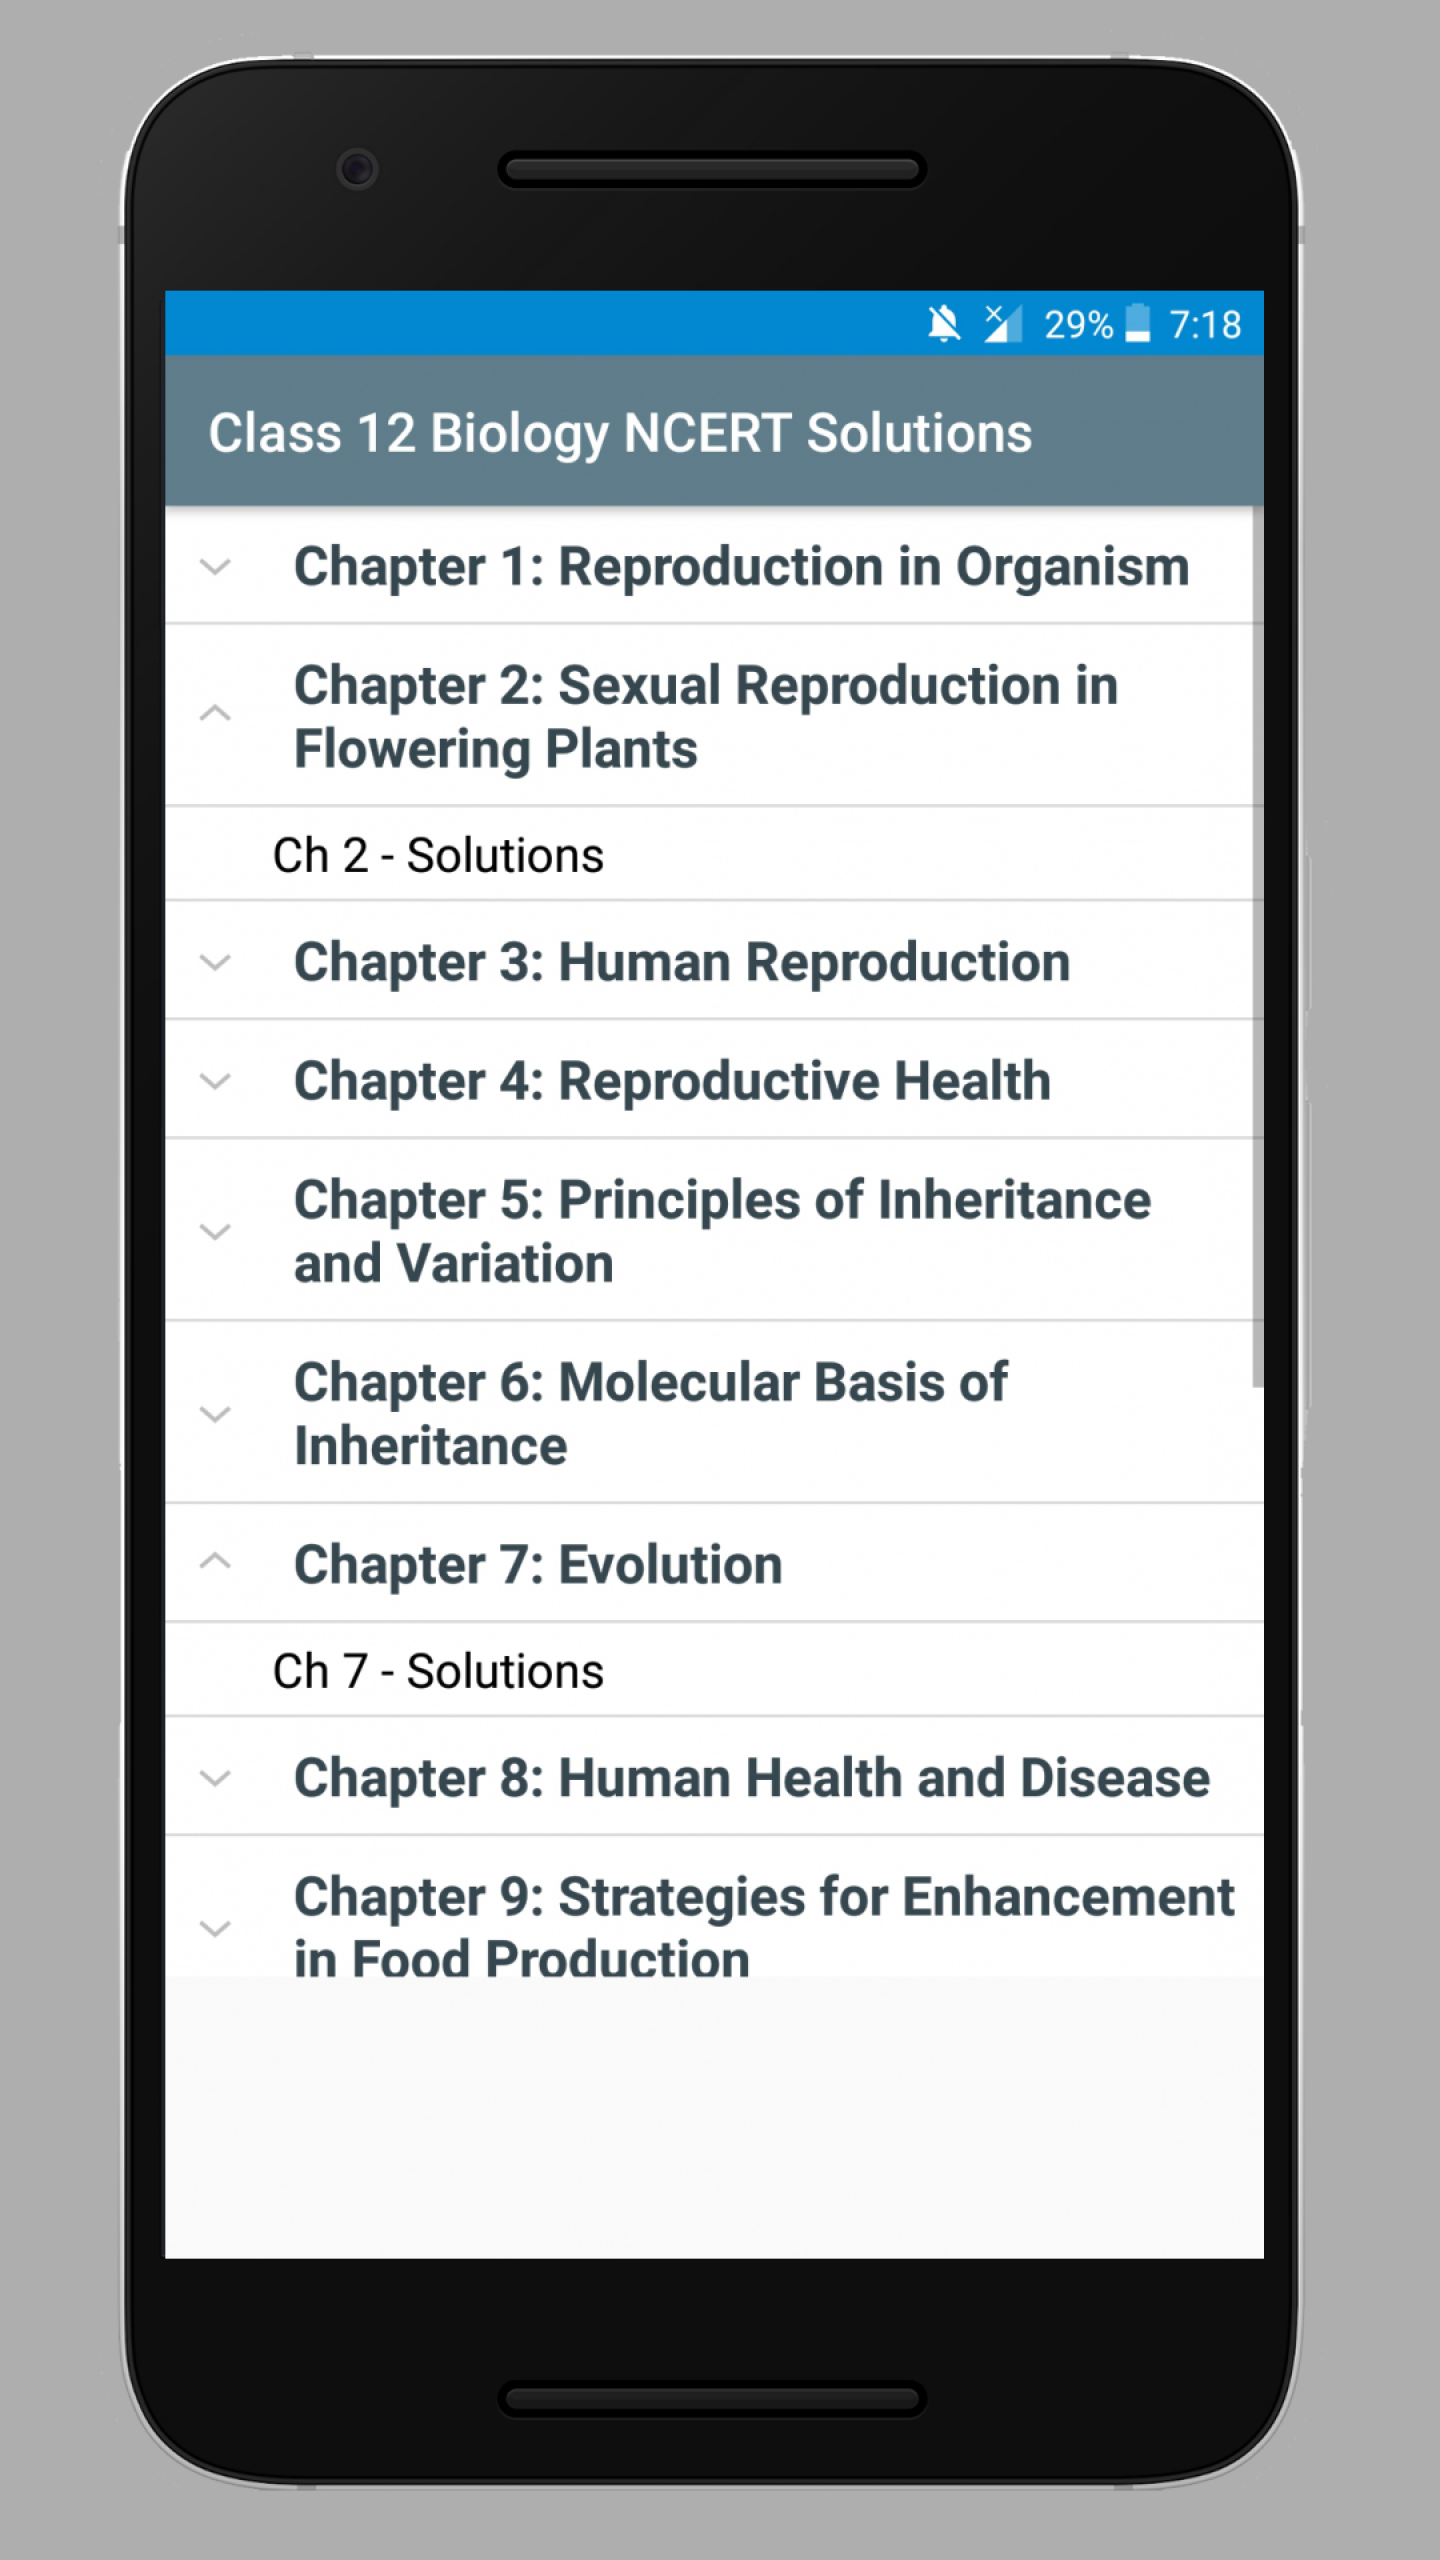 Class 12 Biology NCERT Solutions for Android - APK Download - 